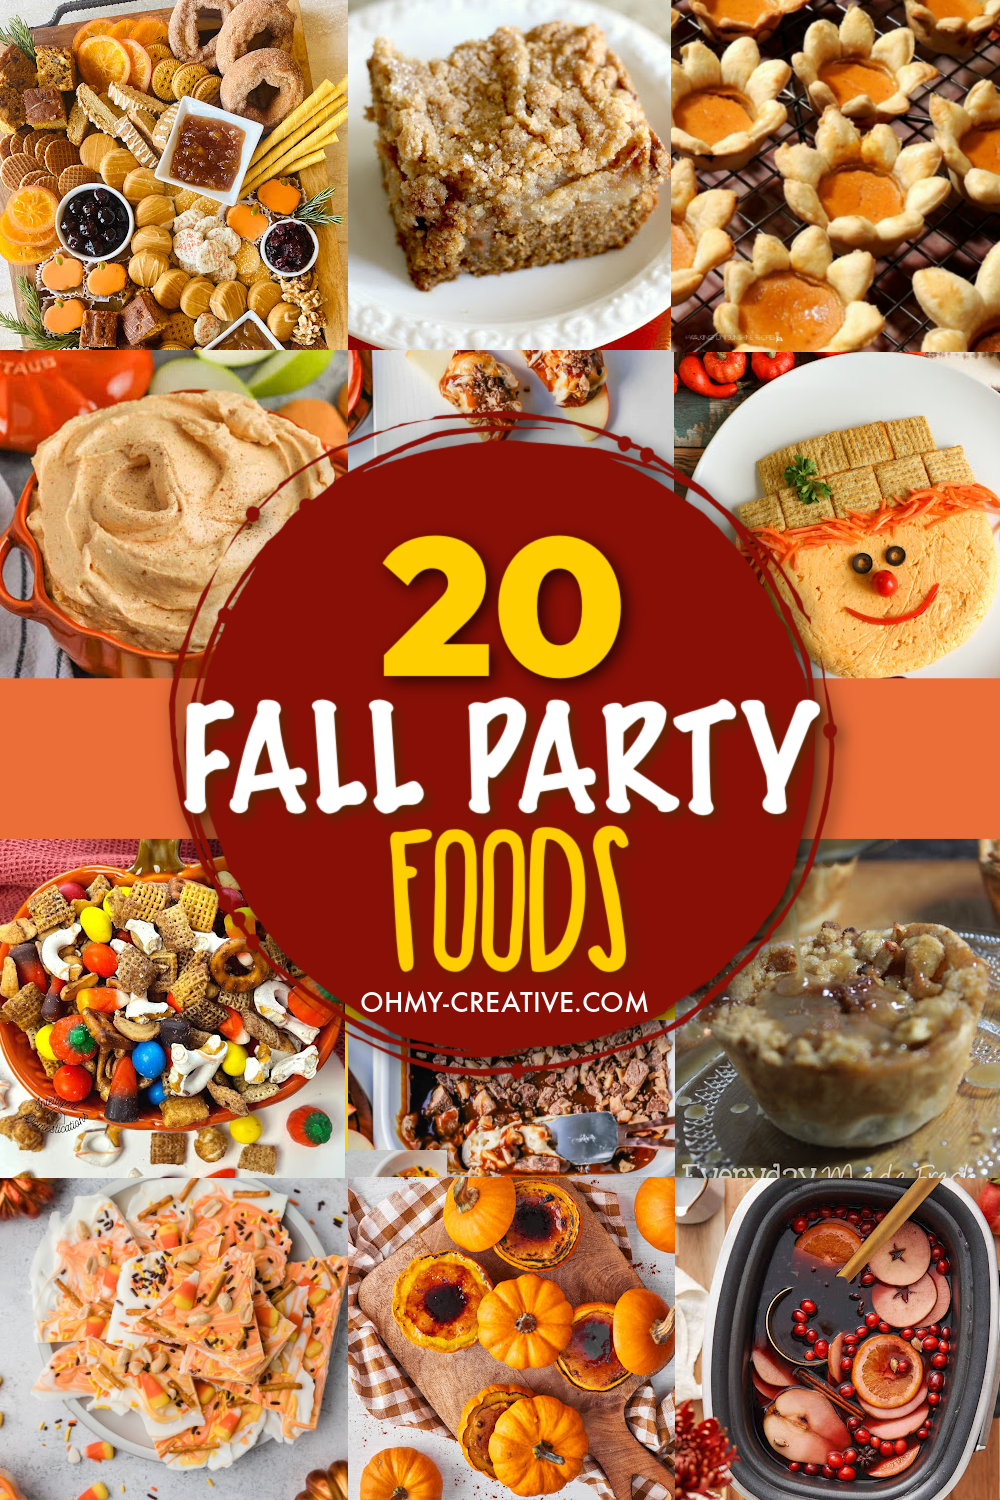 A collage of sweet and savory fall party foods